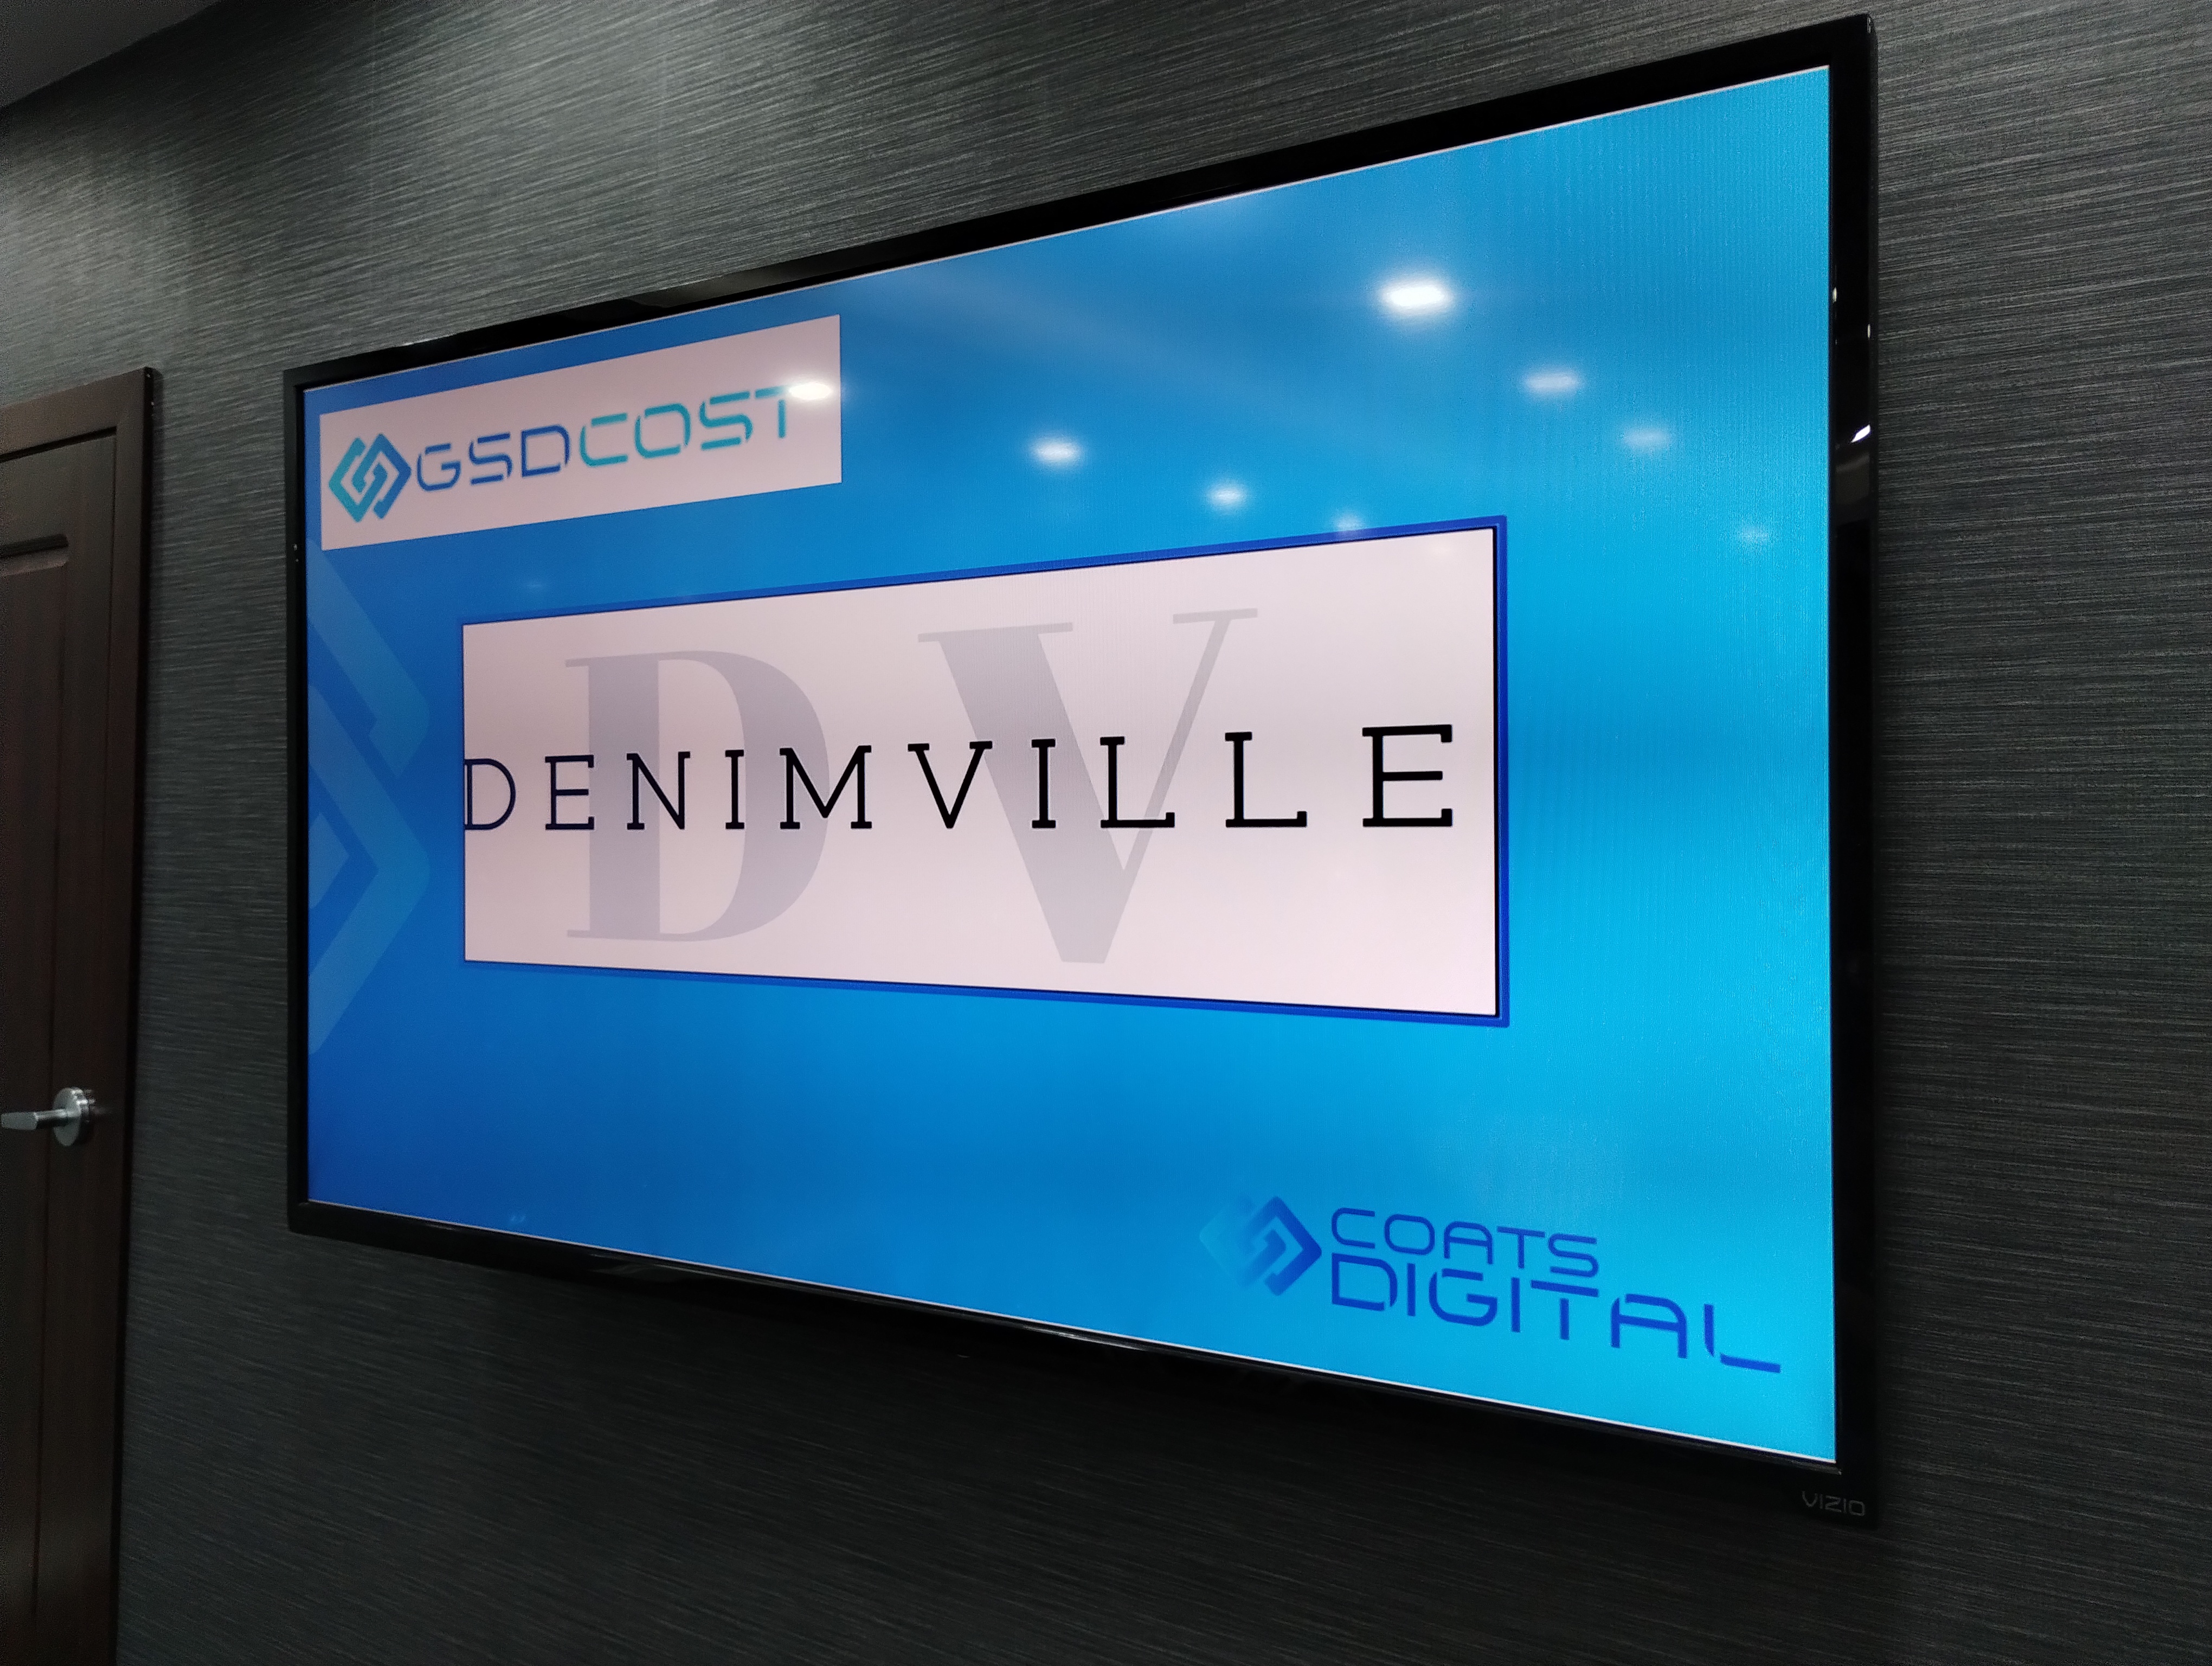 Jeans Manufacturer, Denimville, Unlocks Synergies with the Adoption of Coats Digital’s GSDCost